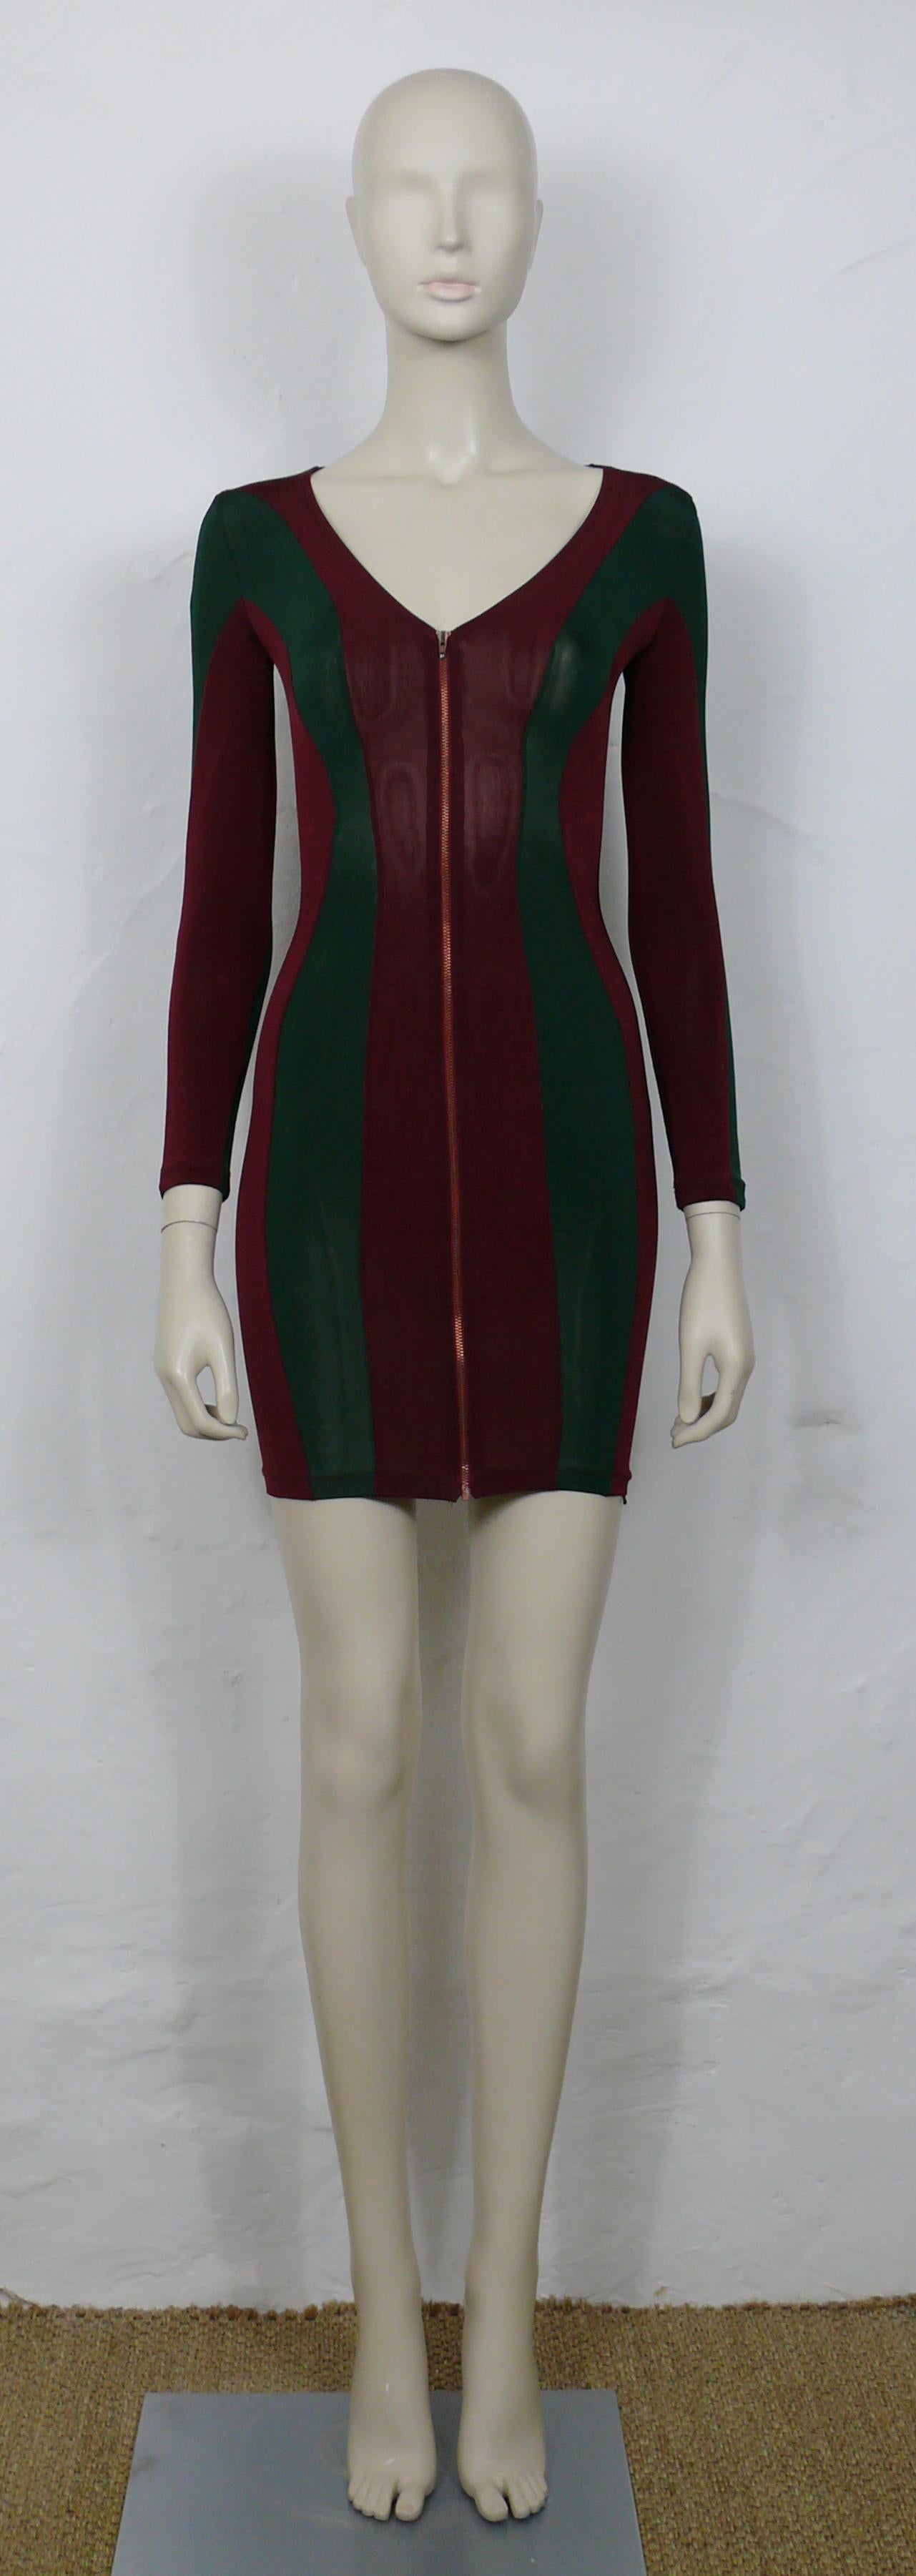 JEAN PAUL GAULTIER JUNIOR Vintage Green/Burgundy Red Color Block Bodycon Dress In Good Condition For Sale In Nice, FR